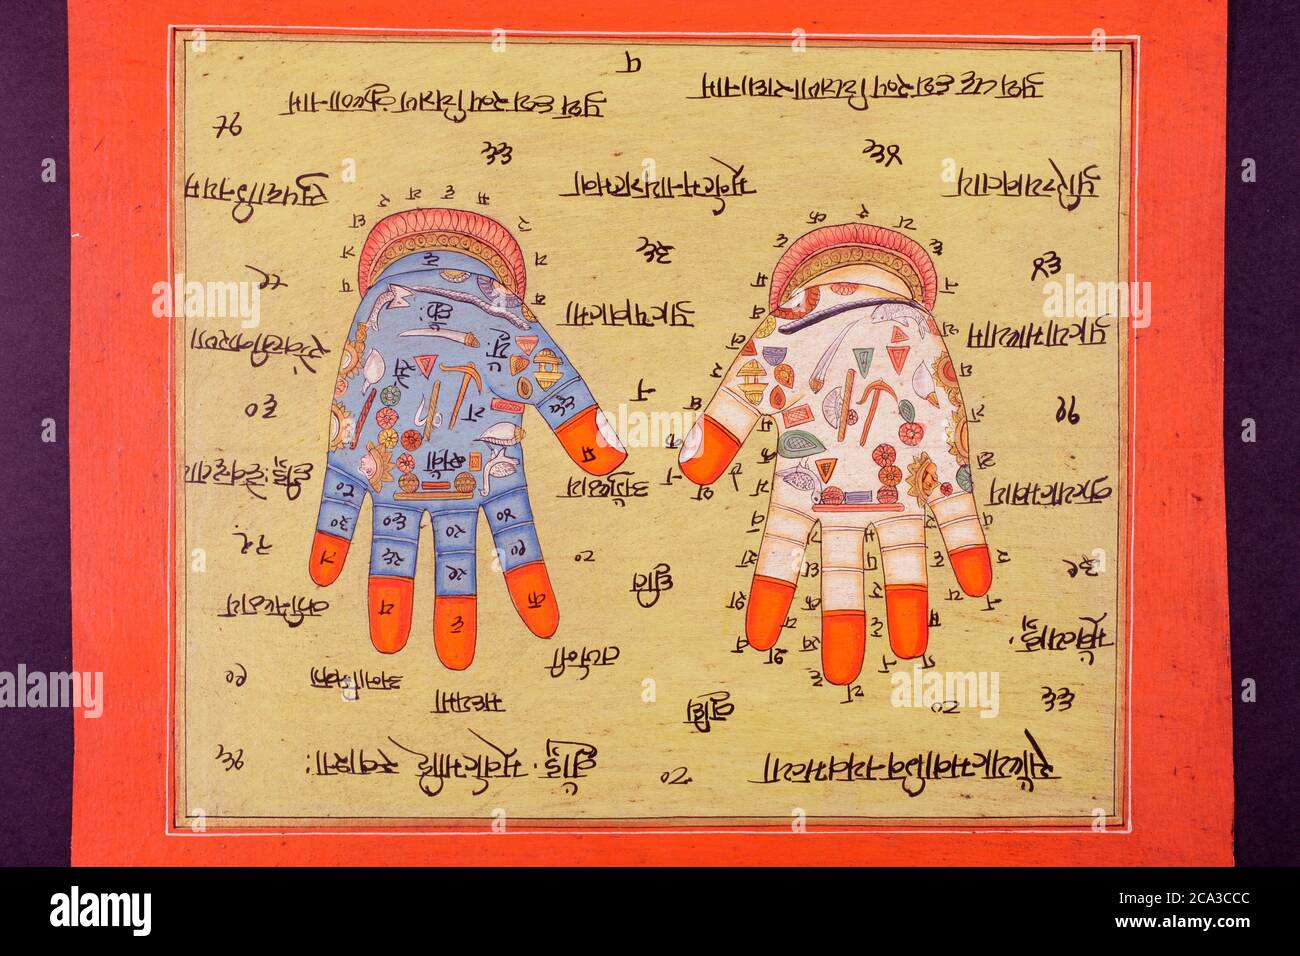 Rajasthani miniature painting from Rajasthan, India. Probably late 19th century or early 20th century. Hands covered with symbols. Stock Photo